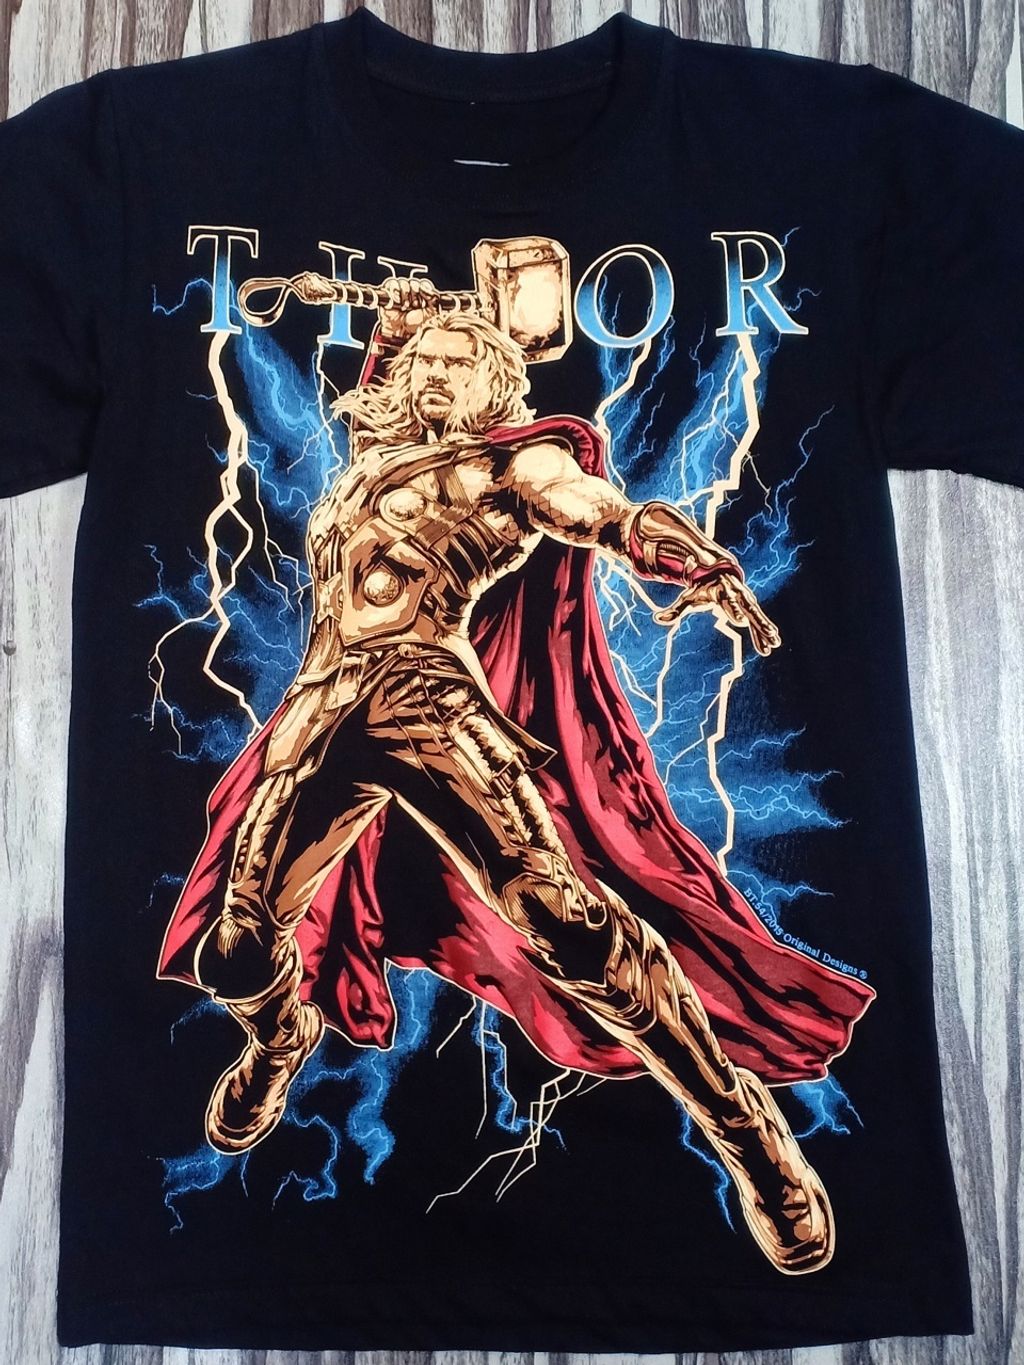 BT54 THOR THUNDER MARVEL UNIVERSE AVENGERS HERO EDITION BLACK TIMBER HIGH  QUALITY SILK SCREEN COLLECTABLE COTTON T-SHIRT – PREMIUM GRADE BLACK TIMBER  NEW TYPE SYSTEM MOAI SPEED HIGH QUALITY SILK SCREEN COLLECTABLE